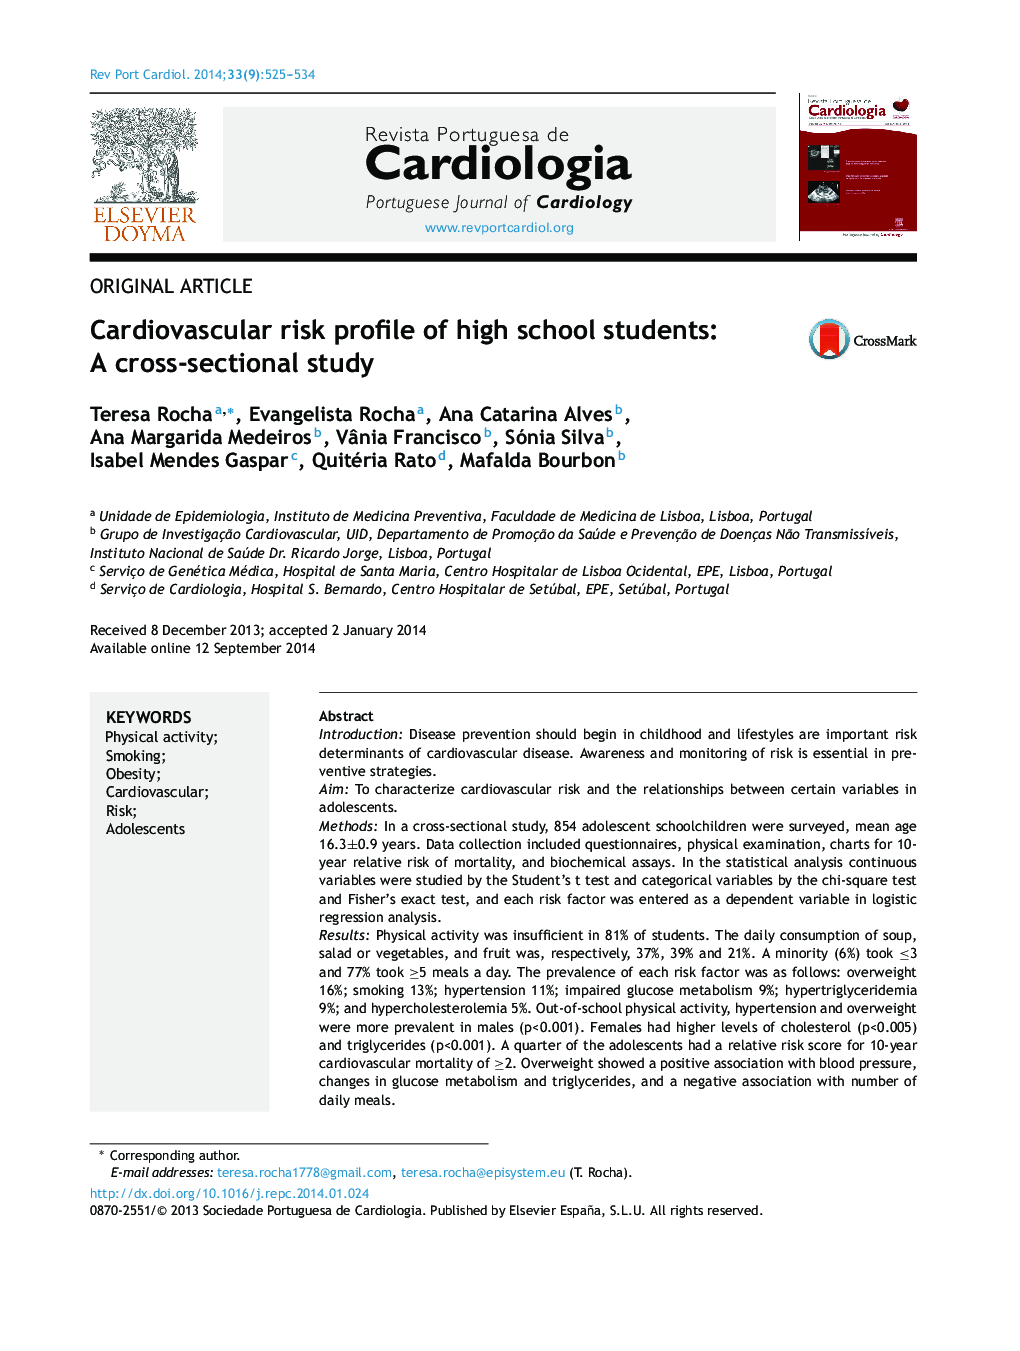 Cardiovascular risk profile of high school students: A cross-sectional study